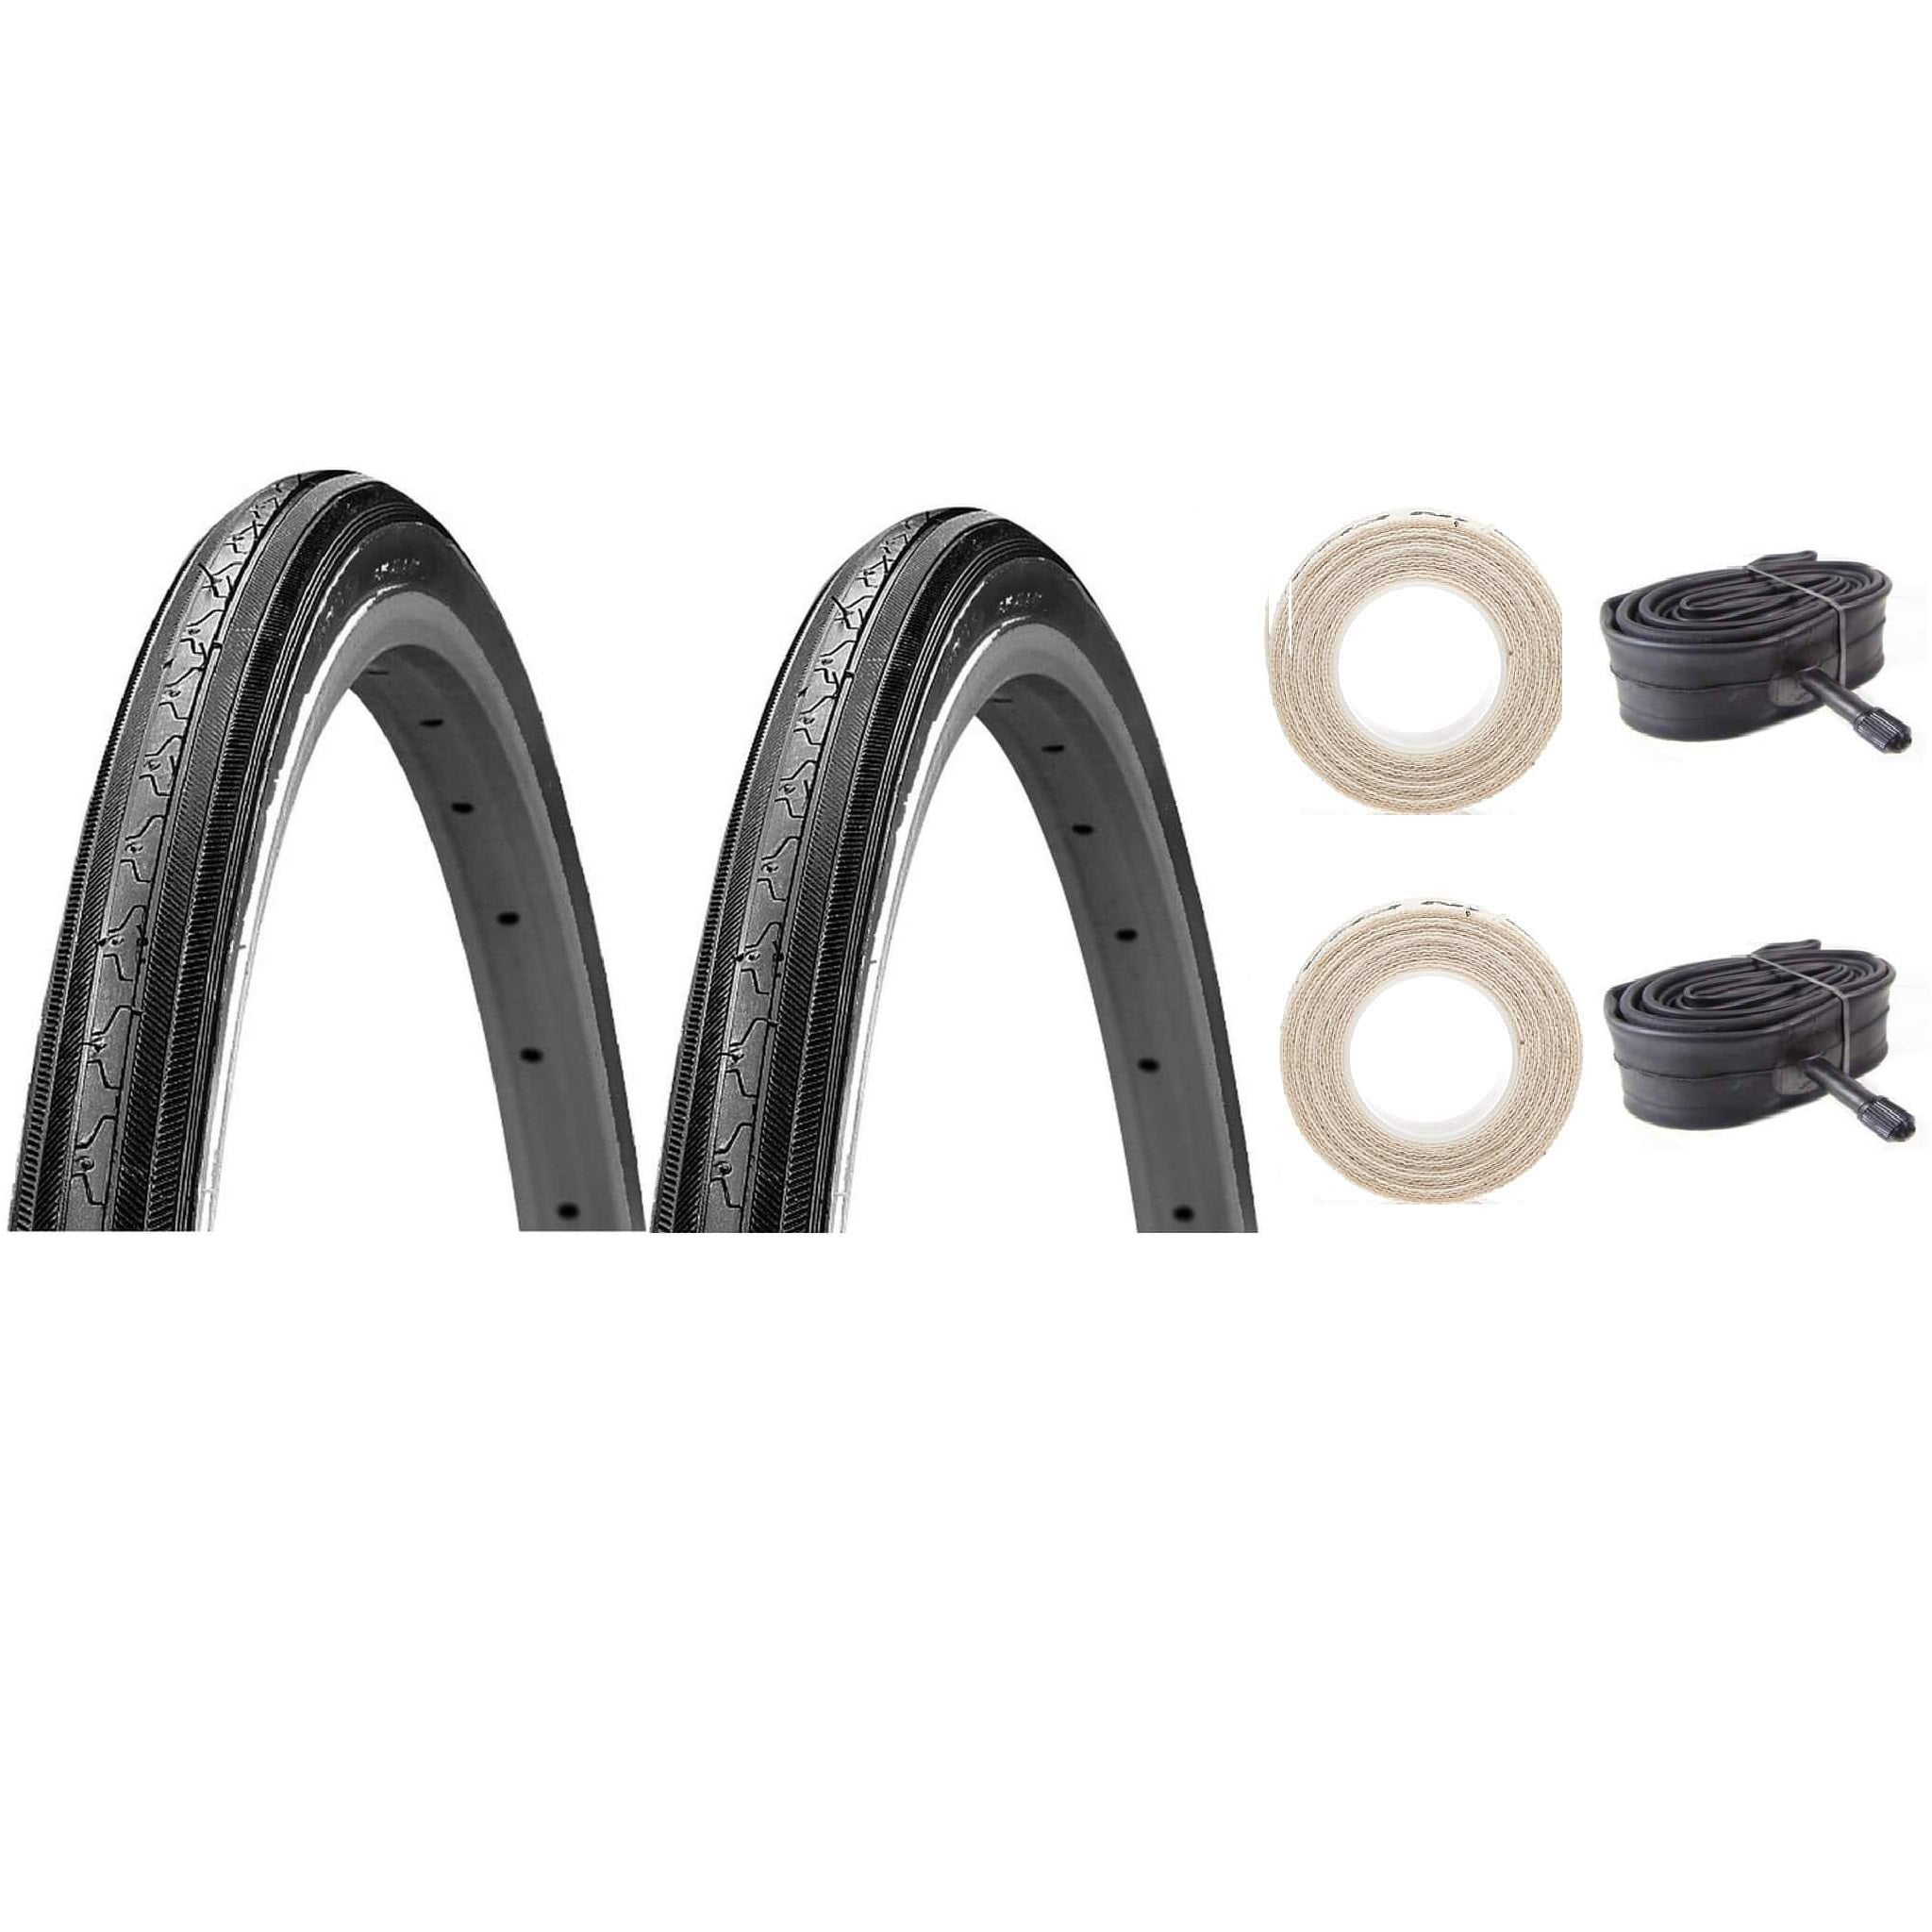 K35 27x1-1/4 black-wall tire with Schrader tube and cloth rim strips